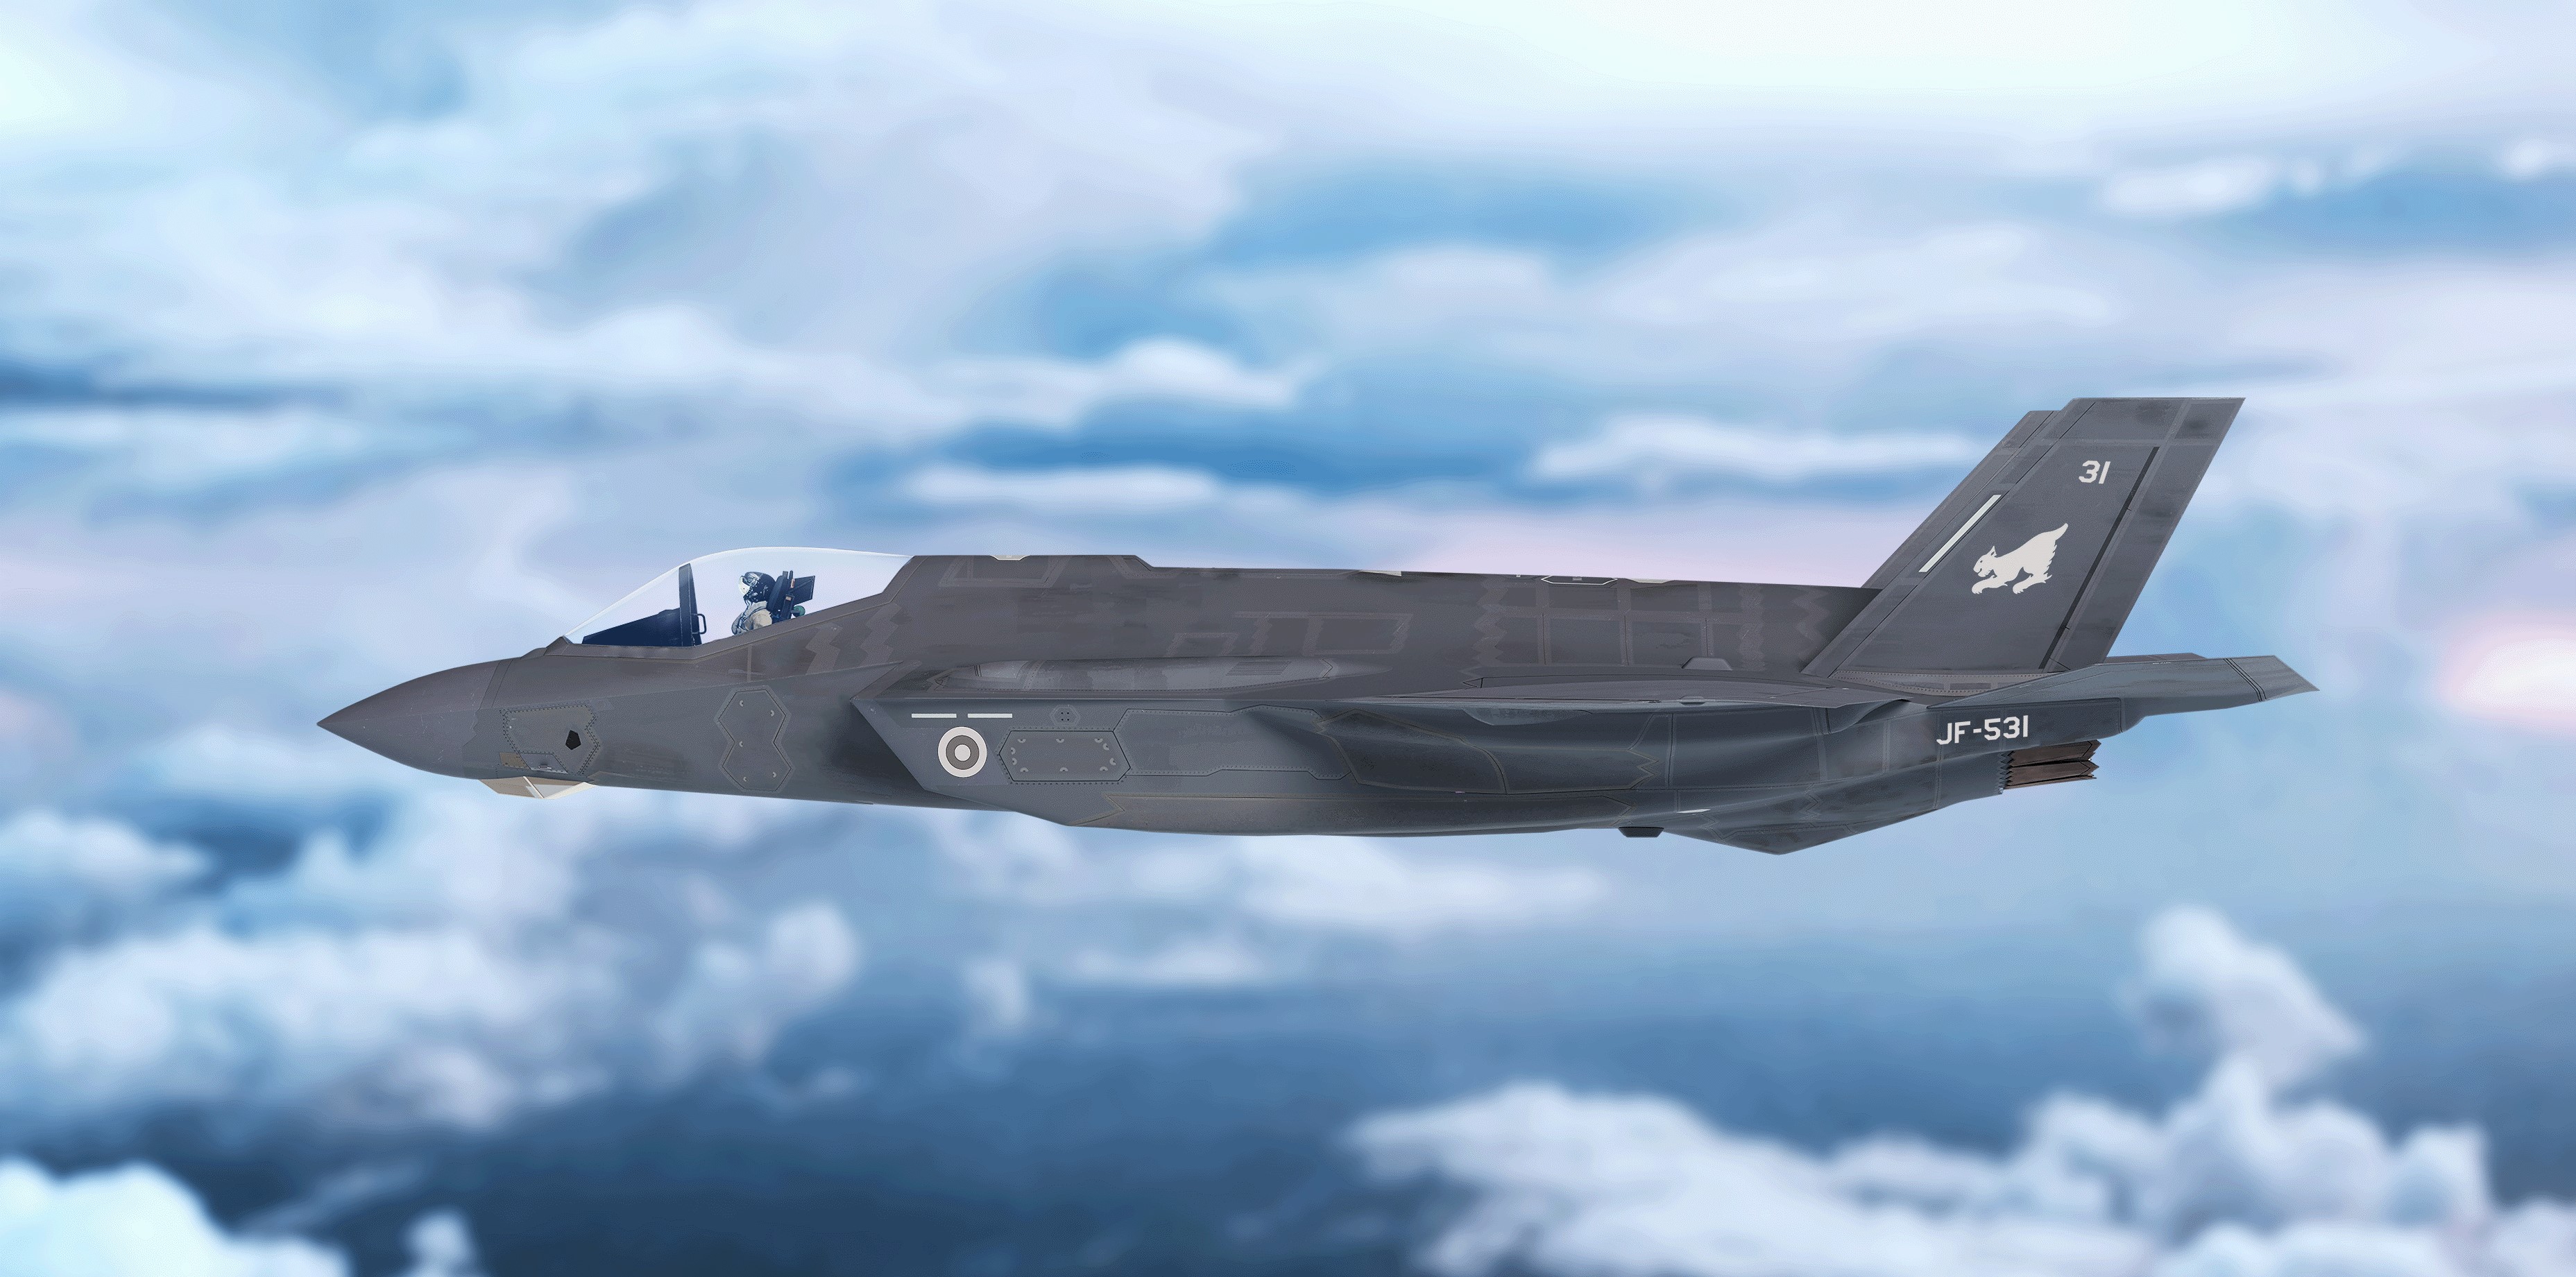 Finnish Air Force Have Announced Their F-35A Lightning IIs  Will  Have  'JF'  As  The Code Marking.